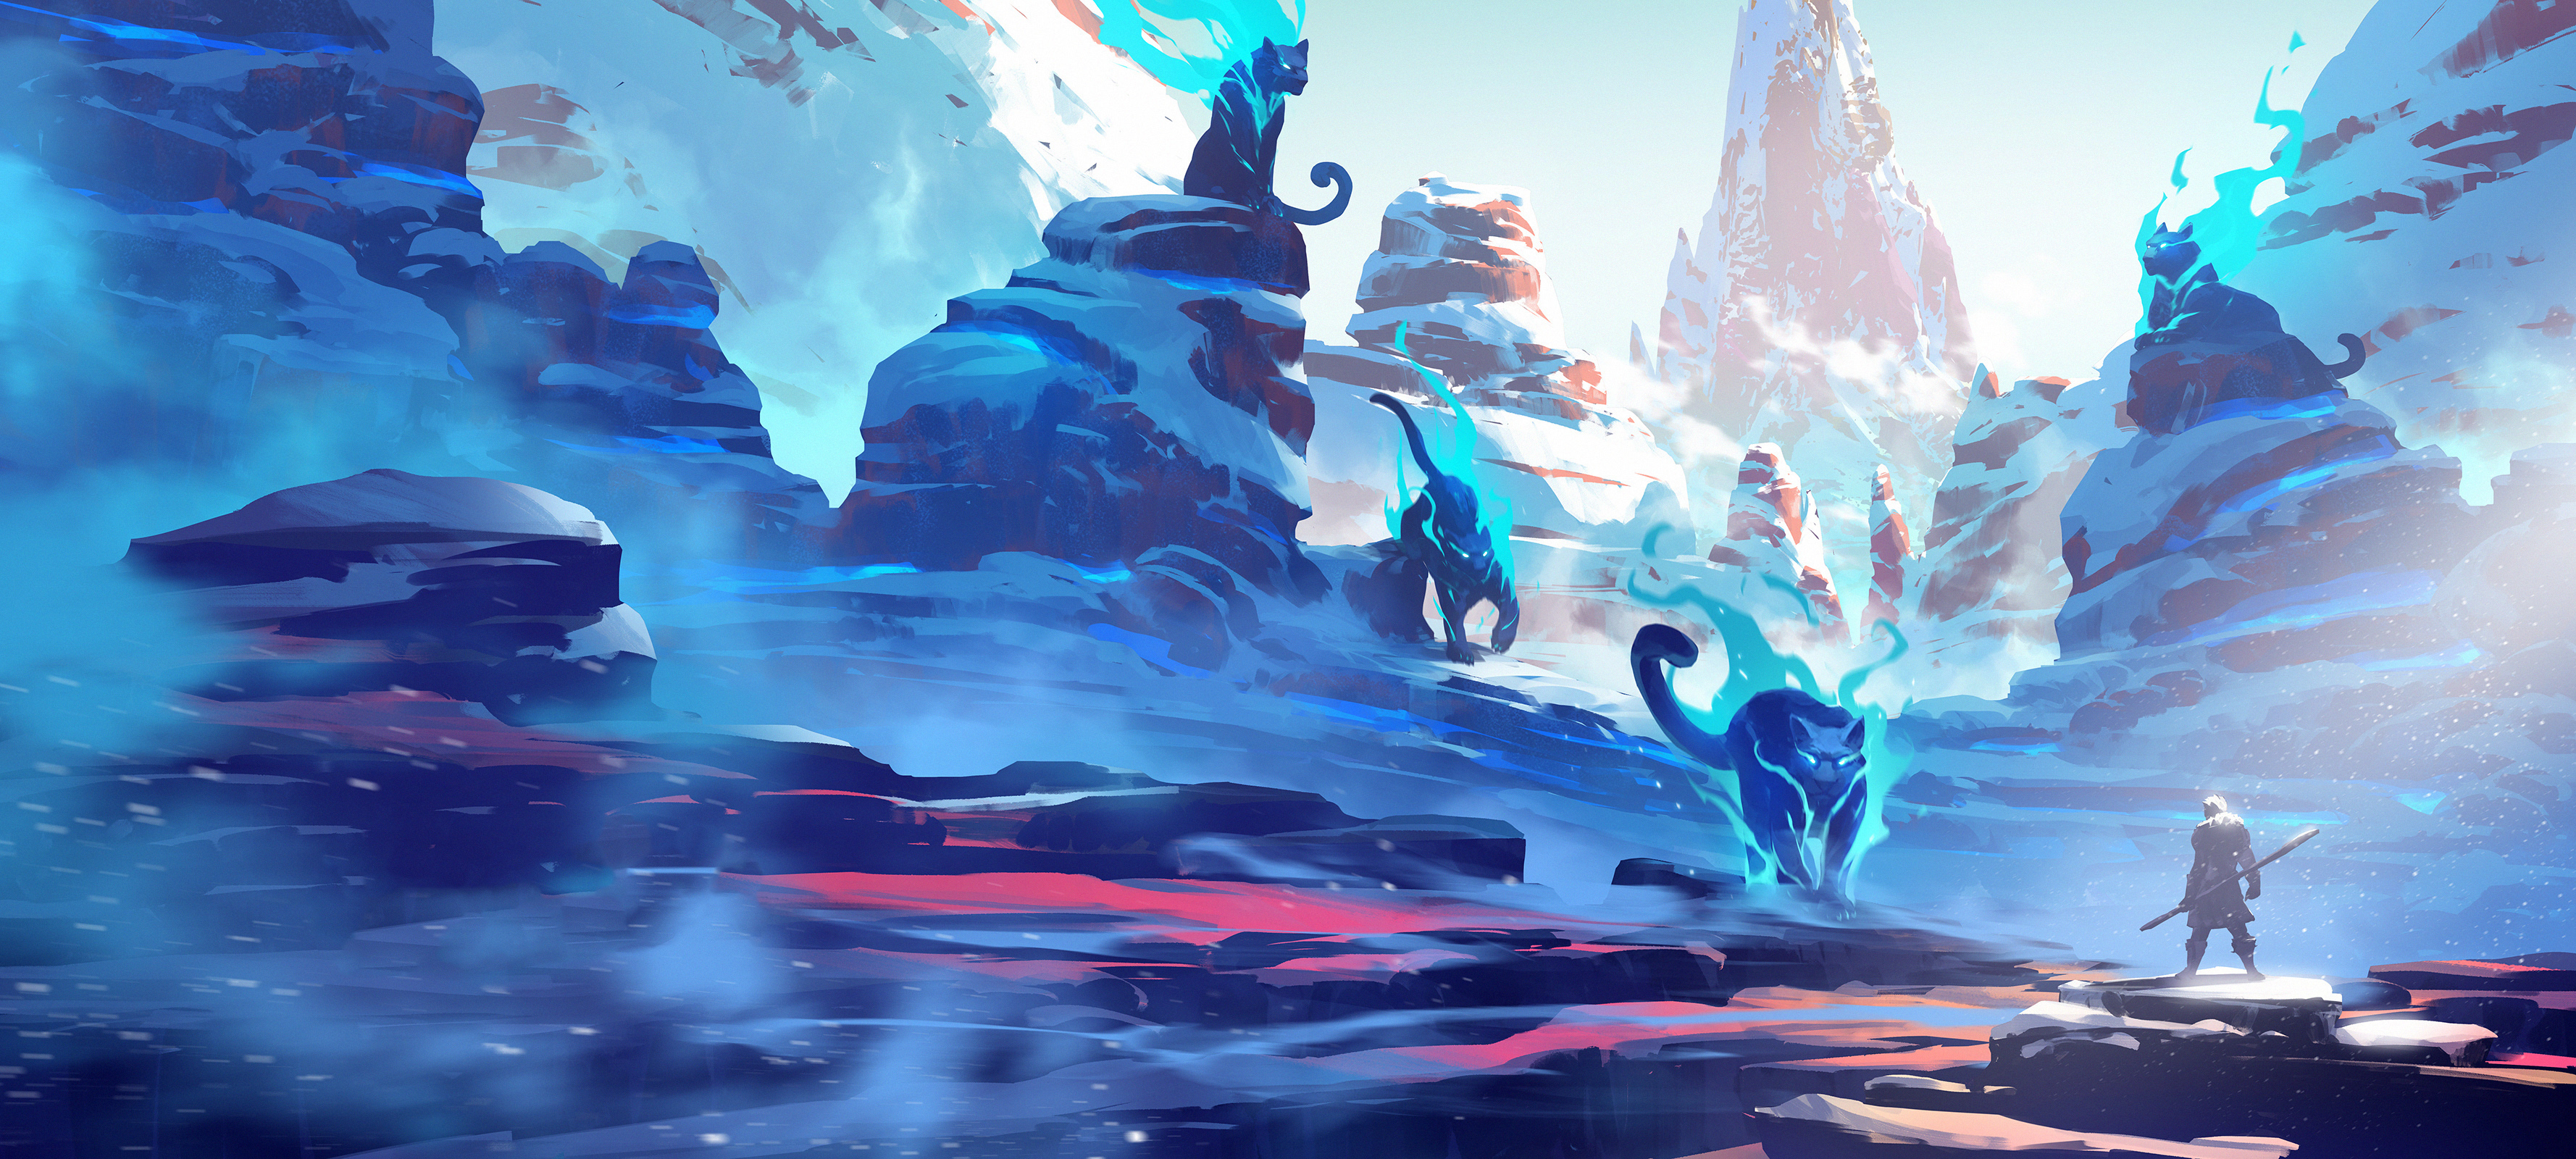 Duelyst Wallpapers